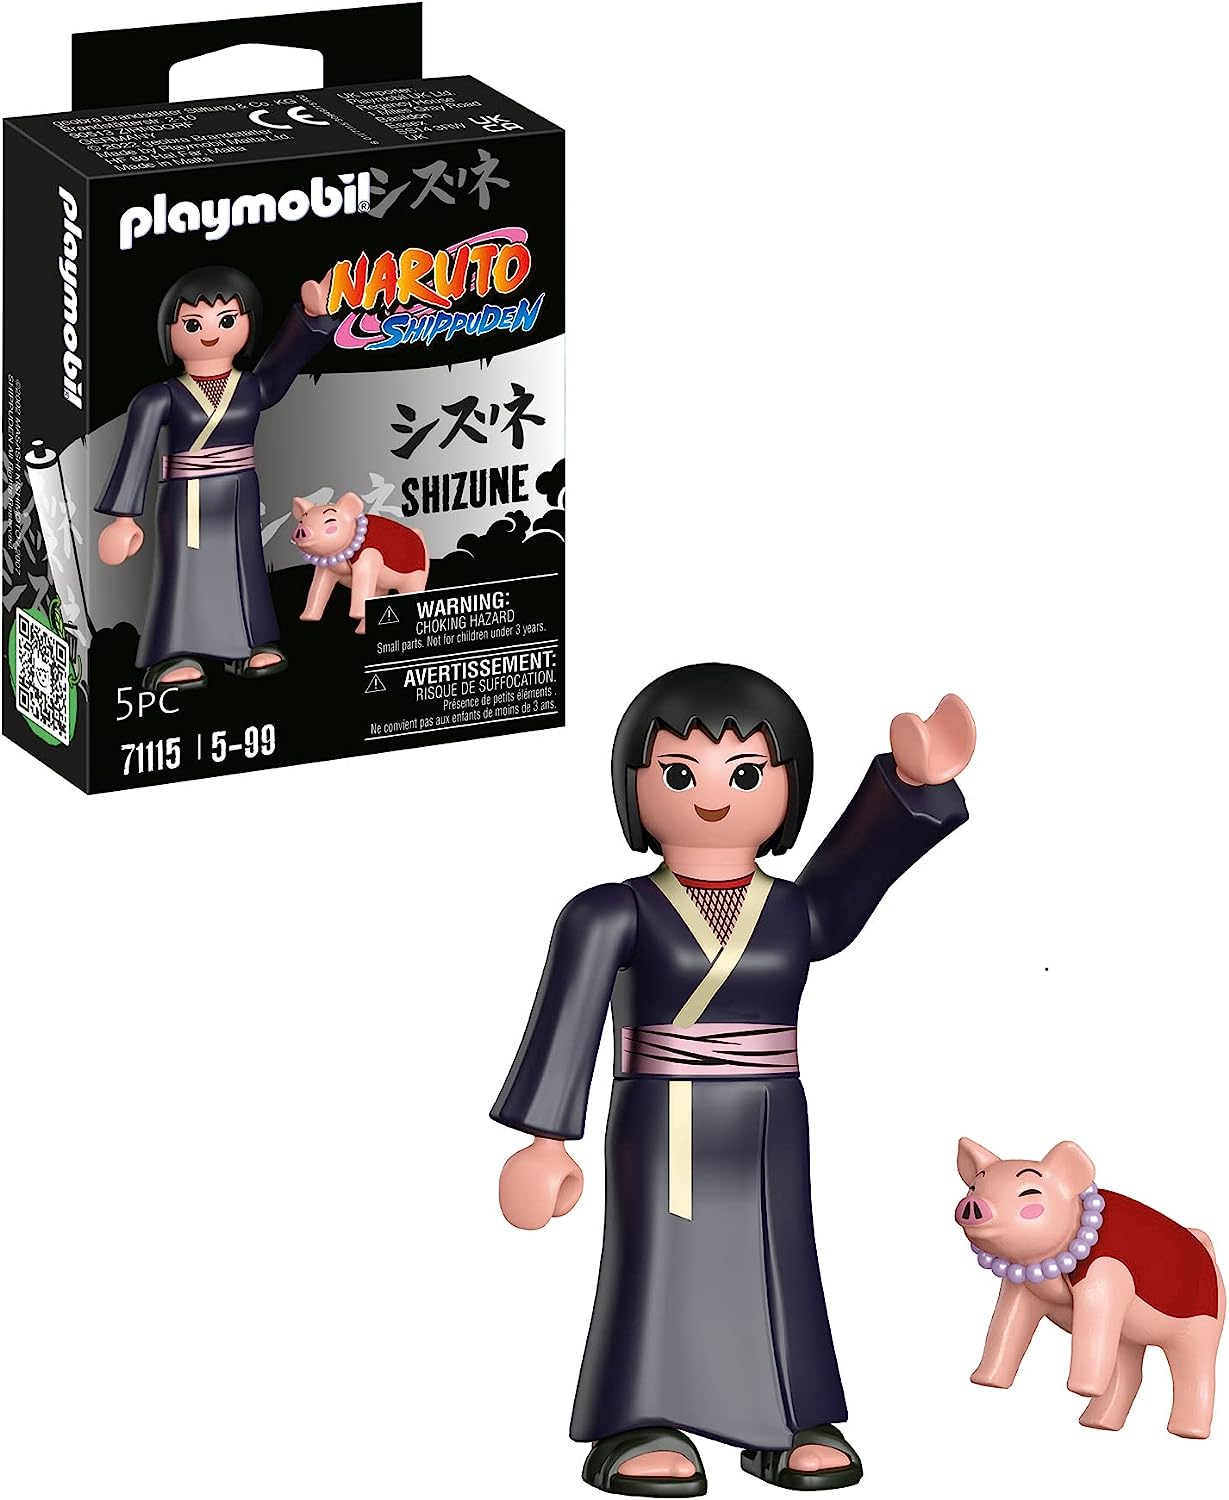 Playmobil Naruto Shippuden 71115 Shizune with Lucky Pig Tonton, Creative Fun for Anime Fans With Great Details and Authentic Extras, 5 Pieces, From 5 Years